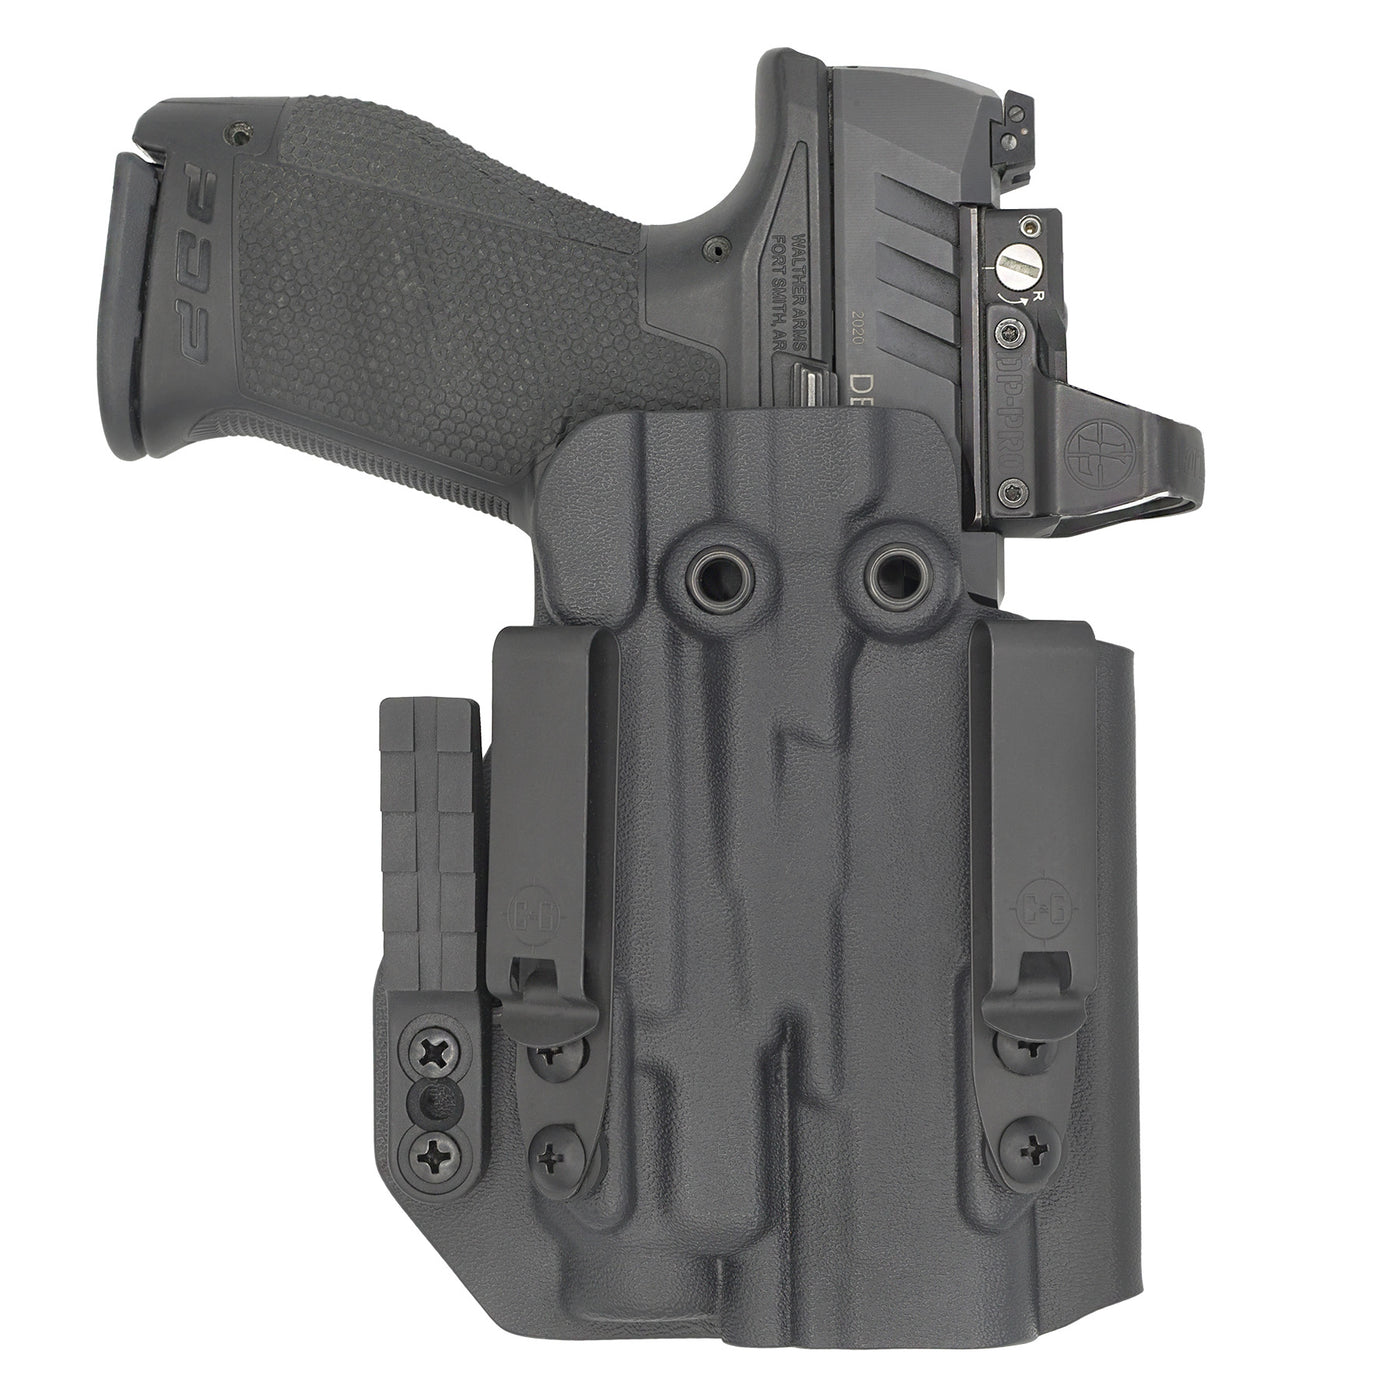 C&G Holsters custom IWB ALPHA UPGRADE Tactical FN 509/t Streamlight TLR7/a in holstered position